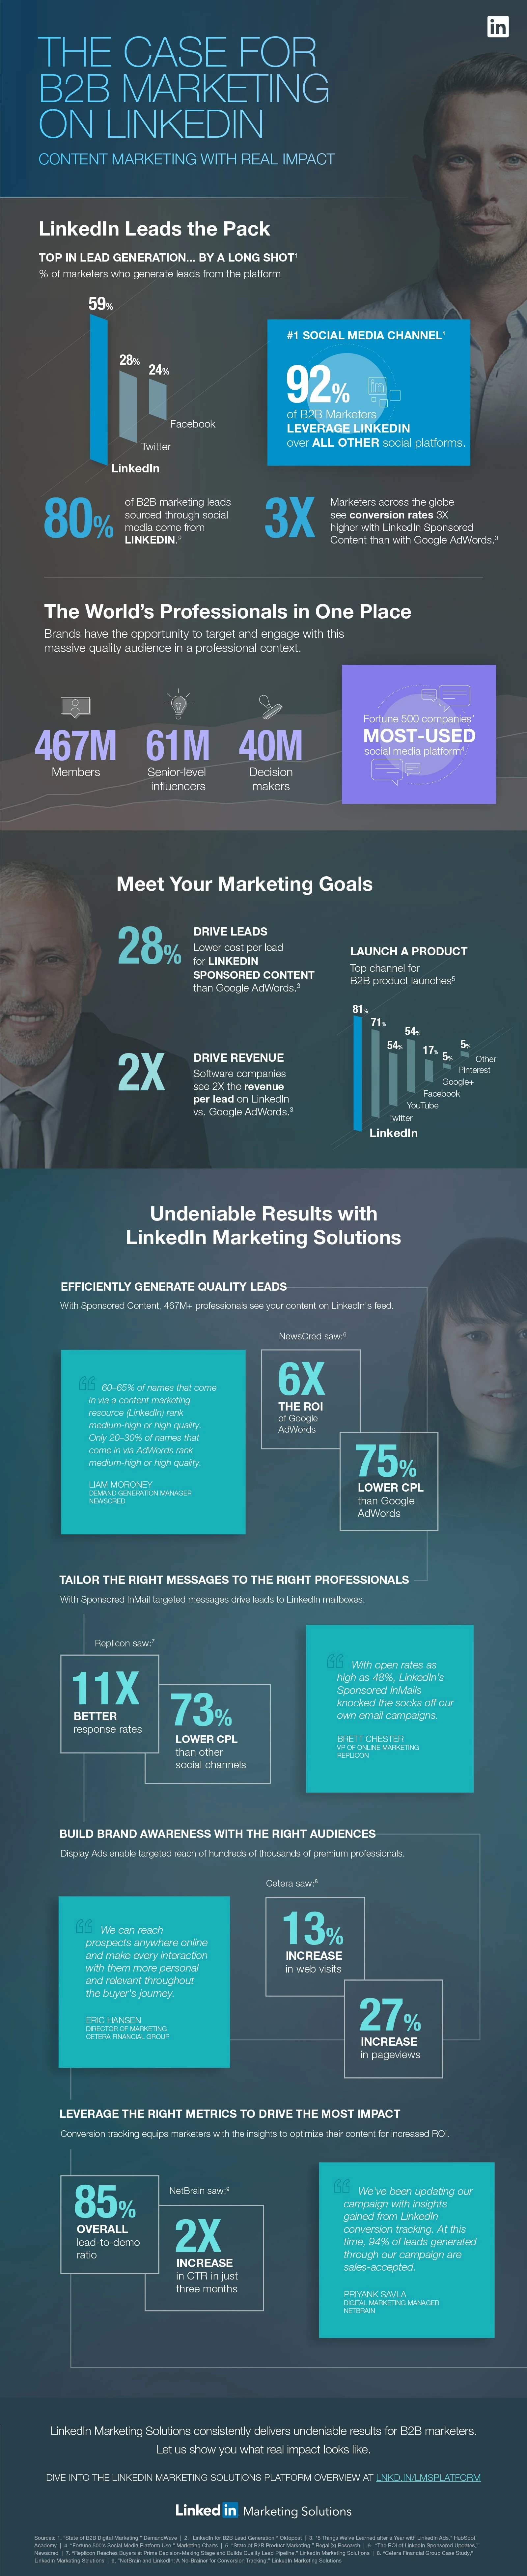 The Case for B2B Marketing on LinkedIn - #Infographic